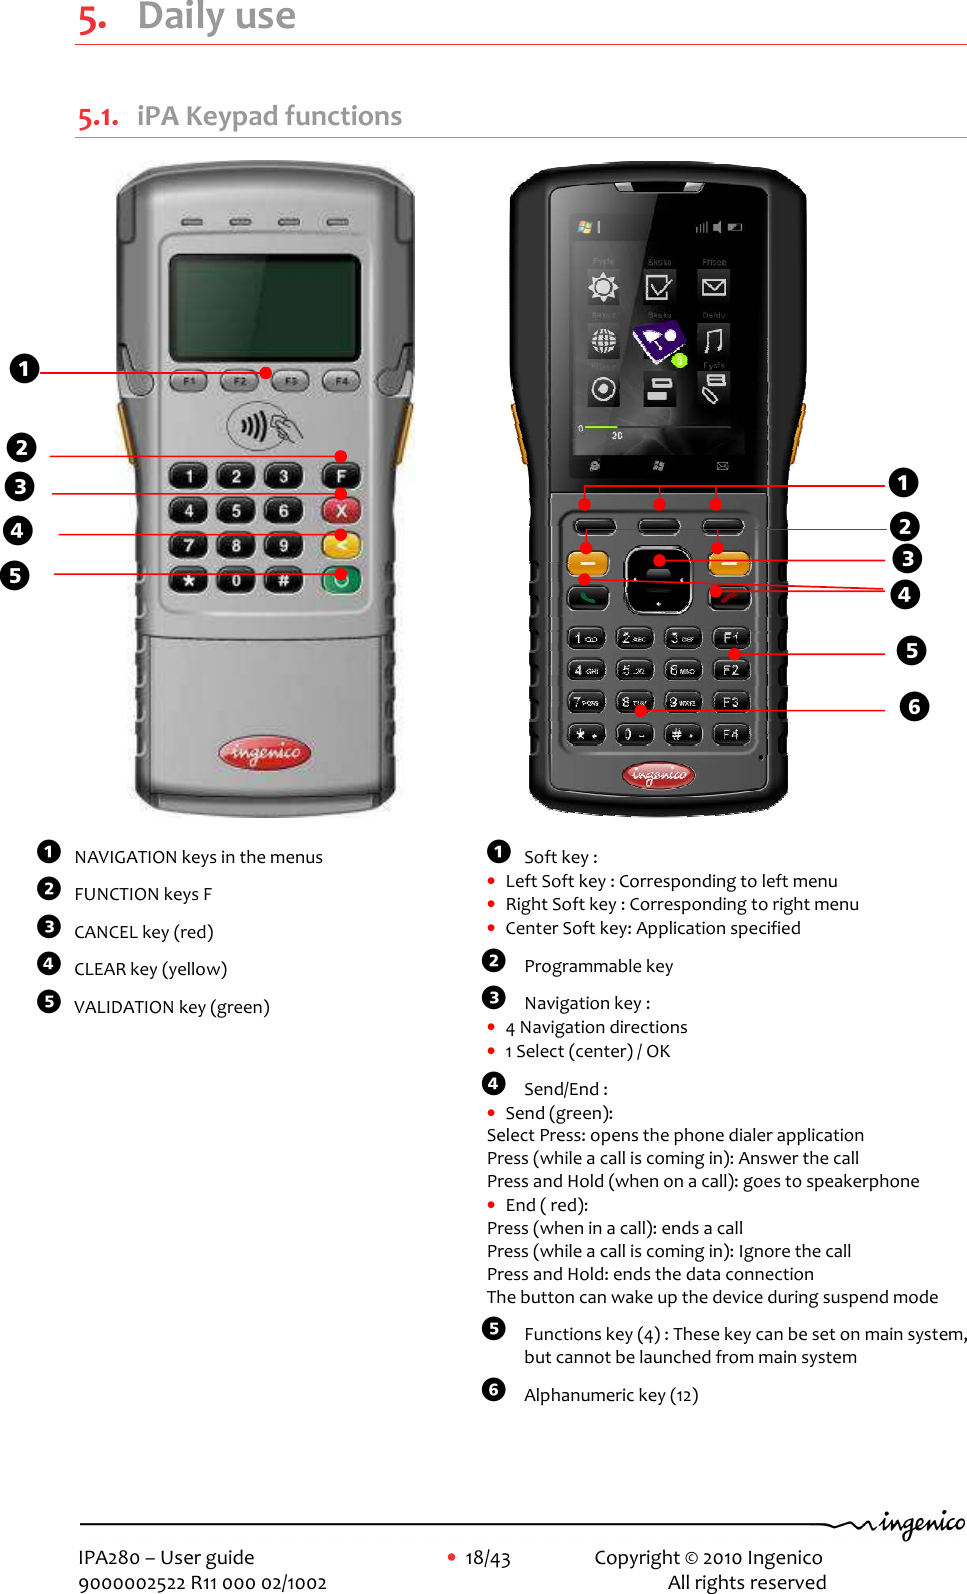     IPA280 – User guide      •  18/43    Copyright © 2010 Ingenico   9000002522 R11 000 02/1002          All rights reserved        5. Daily use 5.1. iPA Keypad functions                          1 2 3 5 4  1 2 4 3  6 1 NAVIGATION keys in the menus     2 FUNCTION keys F 3 CANCEL key (red) 4 CLEAR key (yellow)  5 VALIDATION key (green) 1 Soft key :  • Left Soft key : Corresponding to left menu • Right Soft key : Corresponding to right menu • Center Soft key: Application specified 2 Programmable key  3 Navigation key : • 4 Navigation directions • 1 Select (center) / OK 4 Send/End : • Send (green):  Select Press: opens the phone dialer application Press (while a call is coming in): Answer the call Press and Hold (when on a call): goes to speakerphone • End ( red): Press (when in a call): ends a call Press (while a call is coming in): Ignore the call Press and Hold: ends the data connection The button can wake up the device during suspend mode 5 Functions key (4) : These key can be set on main system, but cannot be launched from main system 6 Alphanumeric key (12)     5 